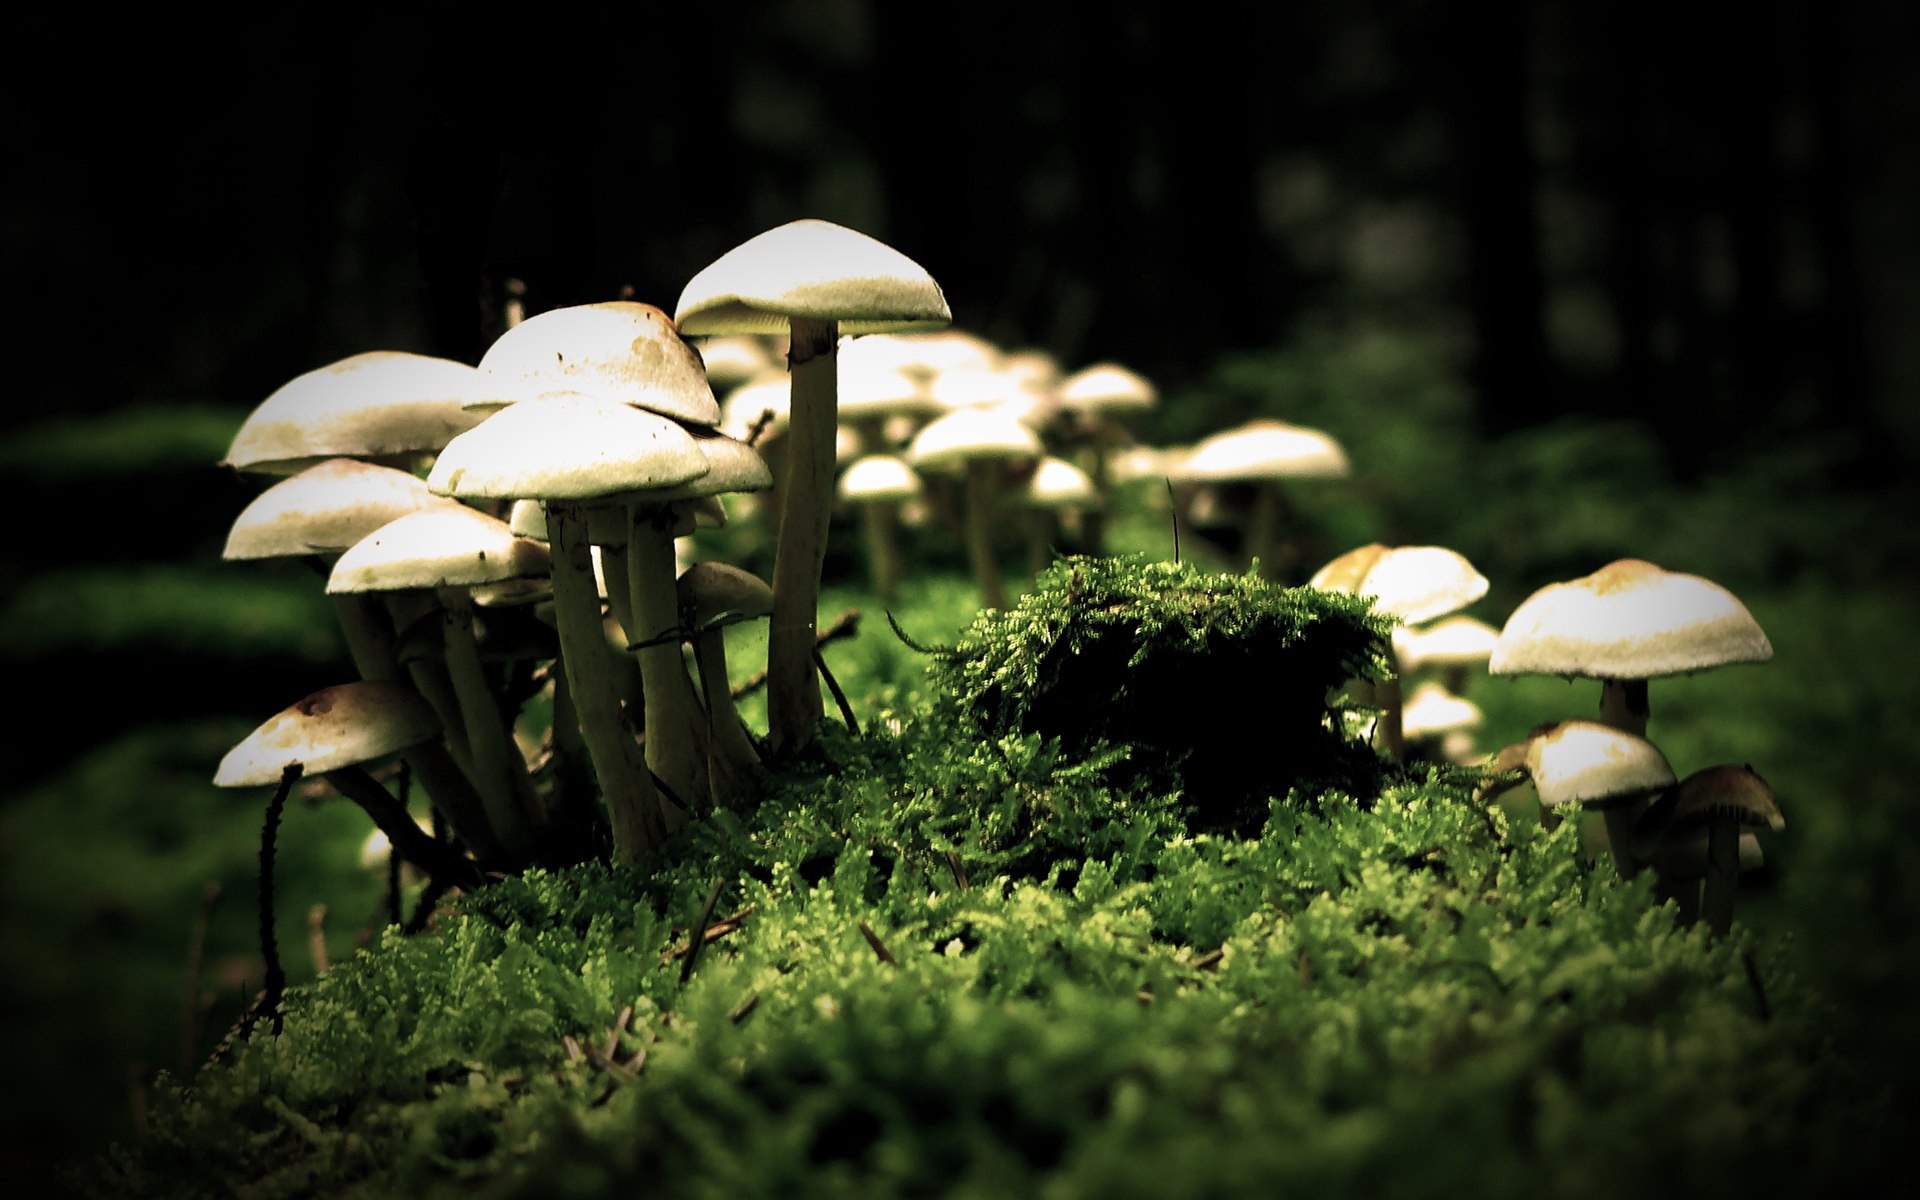 Mushrooms 4K wallpaper for your desktop or mobile screen free and easy to download